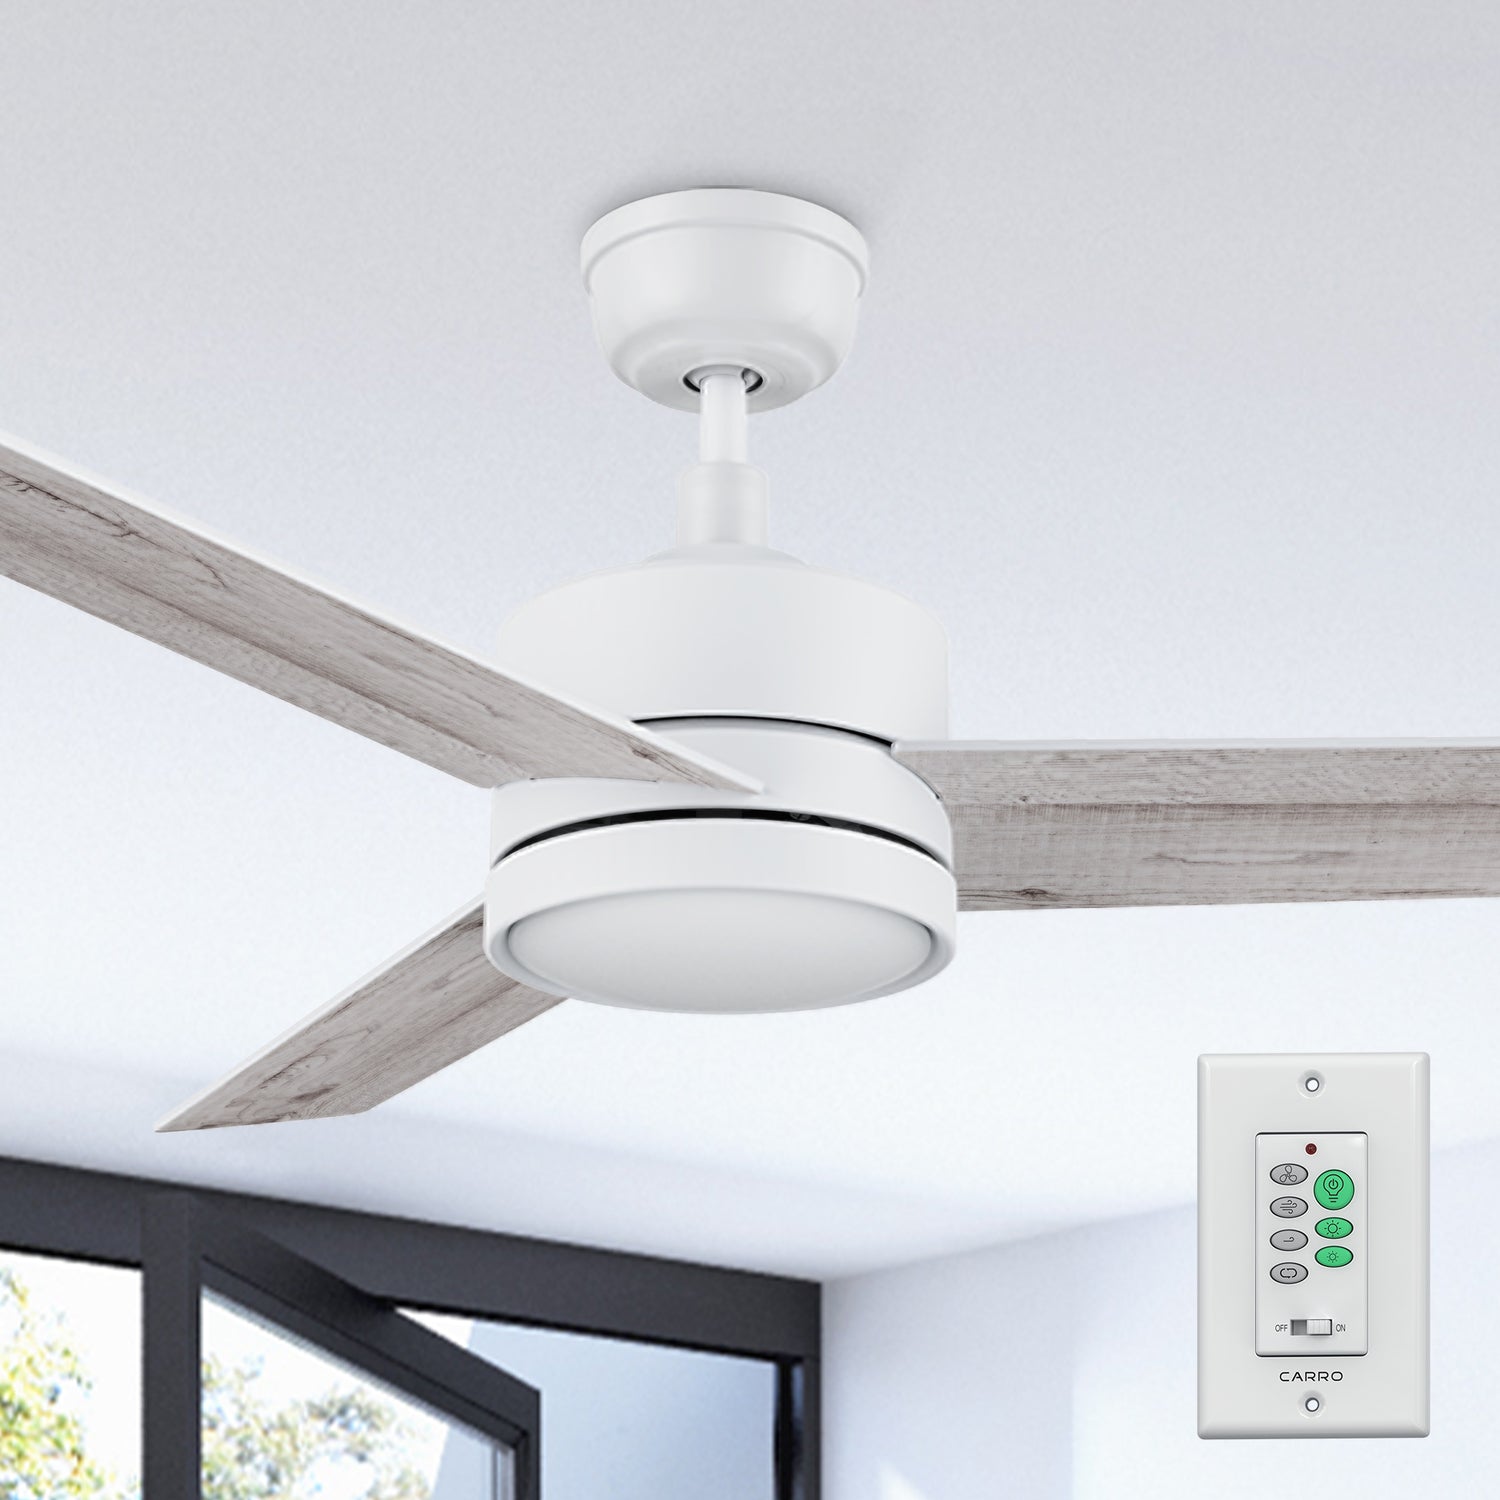 52 inch white modern downrod ceiling fan with dimmable 4000K LED light and wall switch control. 